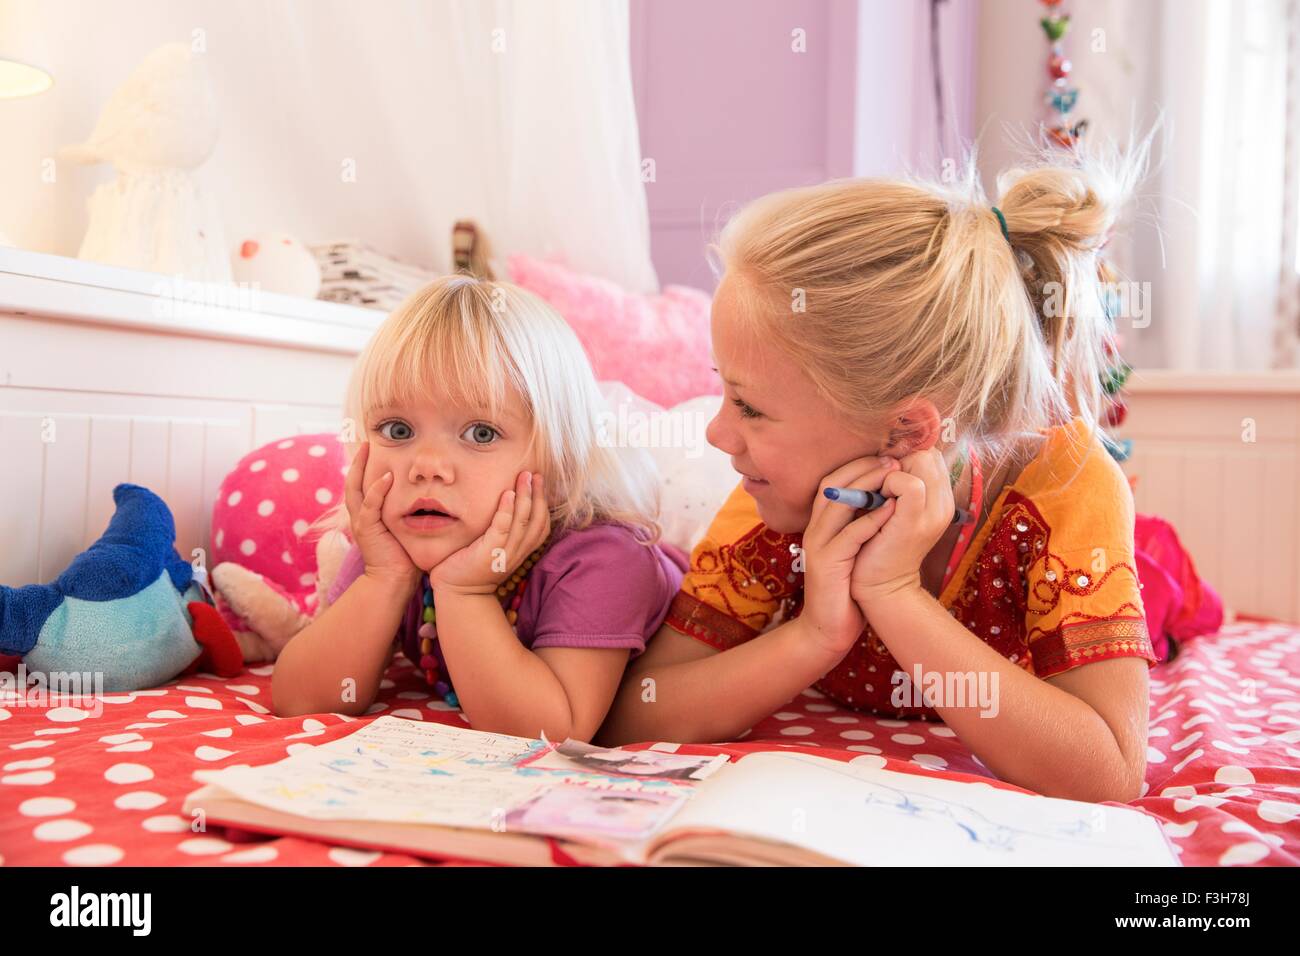 Girl and toddler sister on bed playing with colouring book Stock Photo